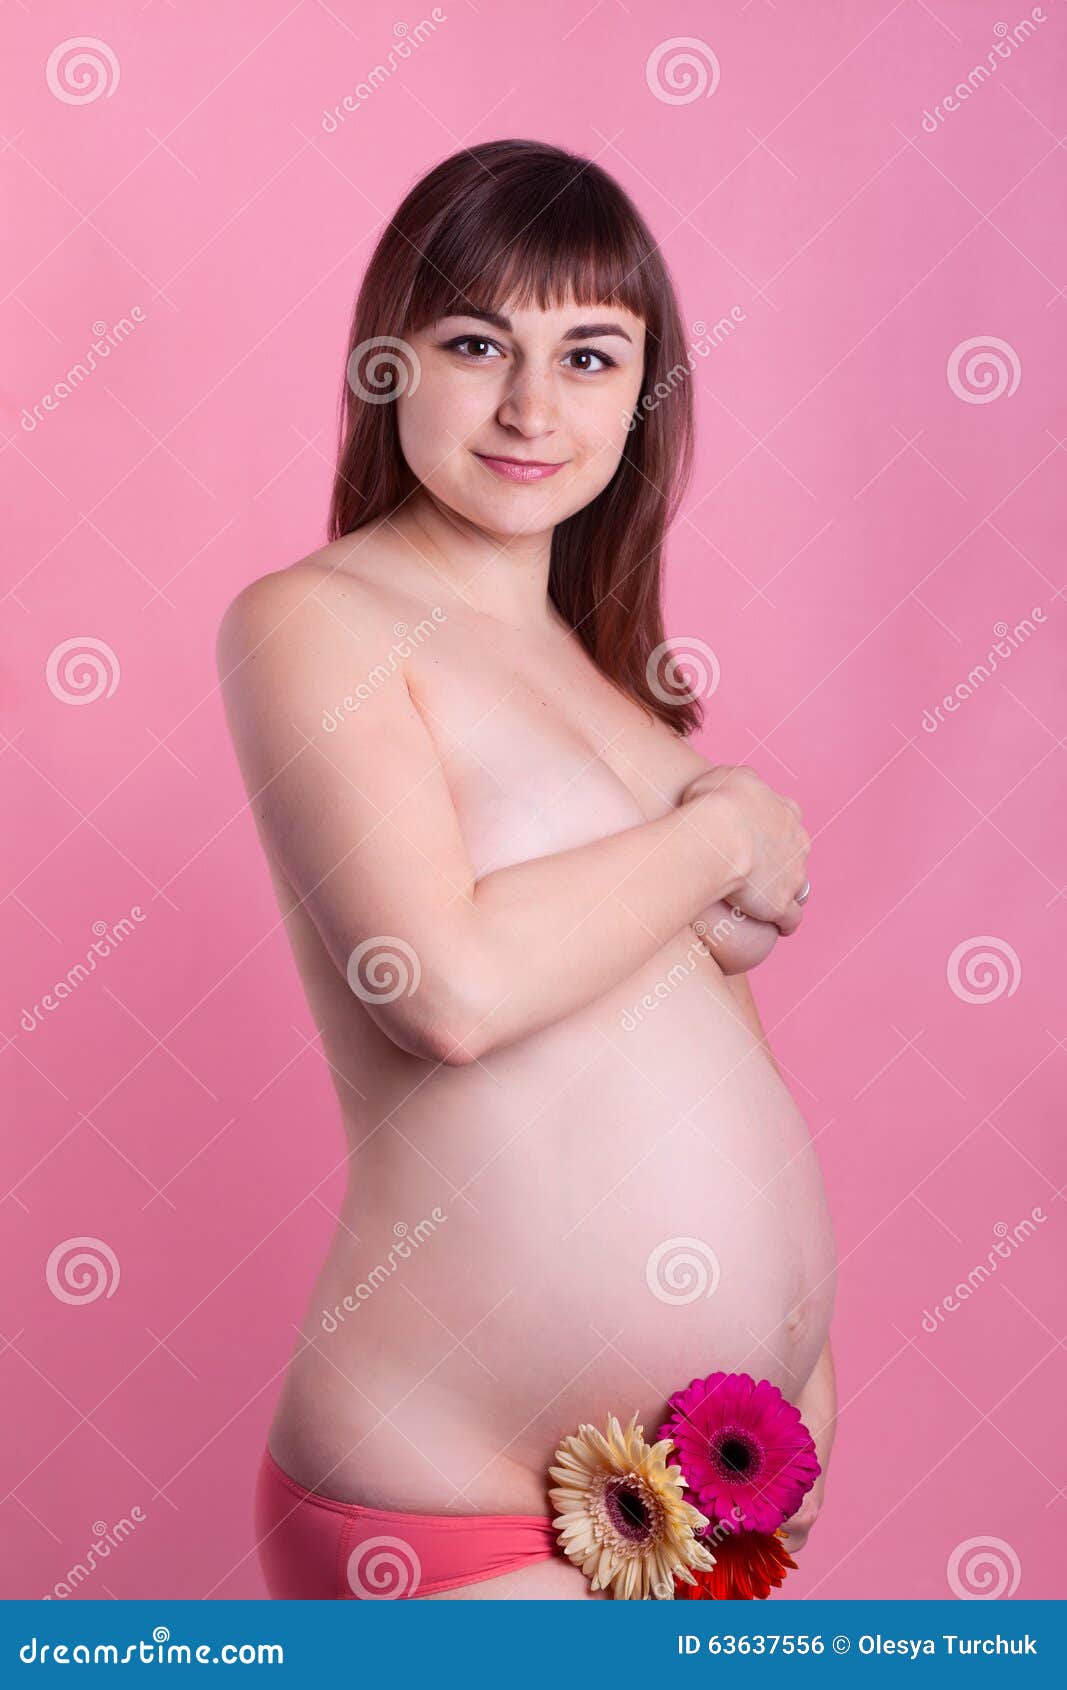 Cute Naked Pregnant